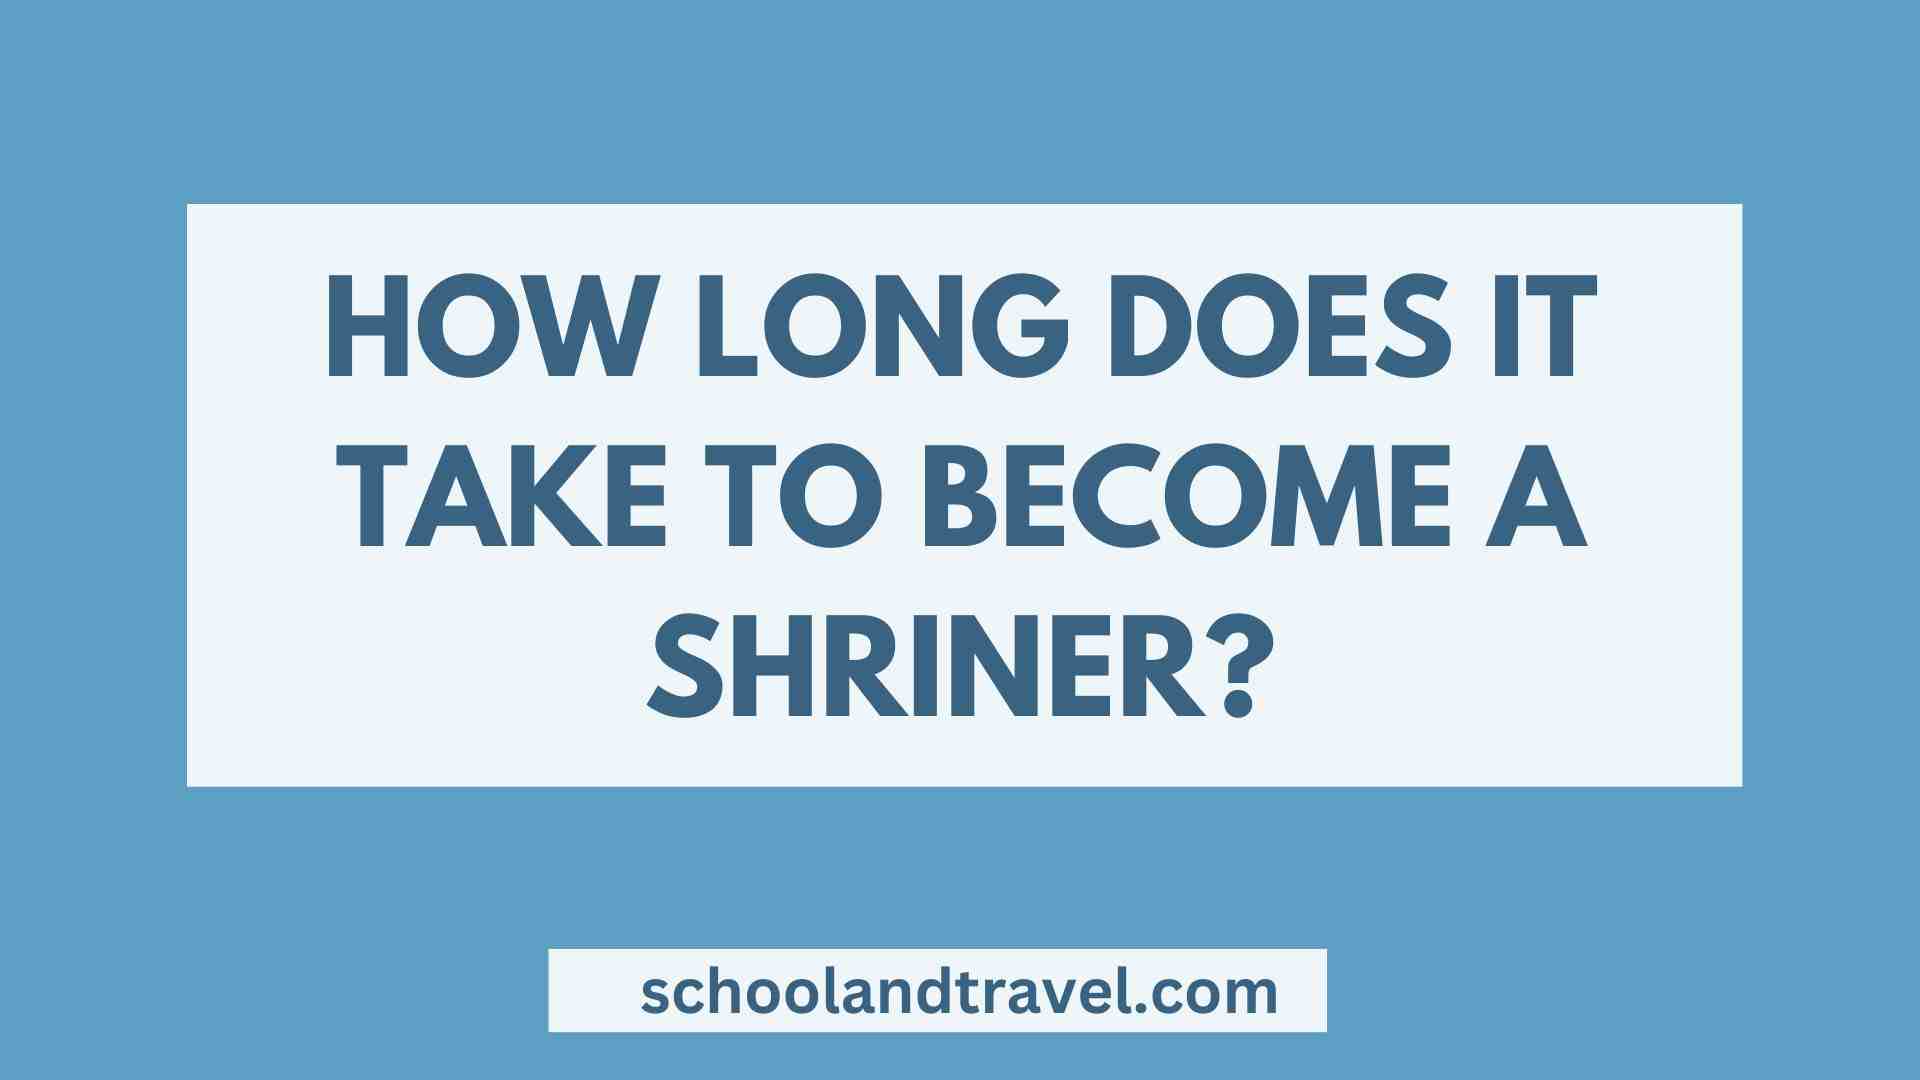 How Long Does It Take To Become A Shriner?